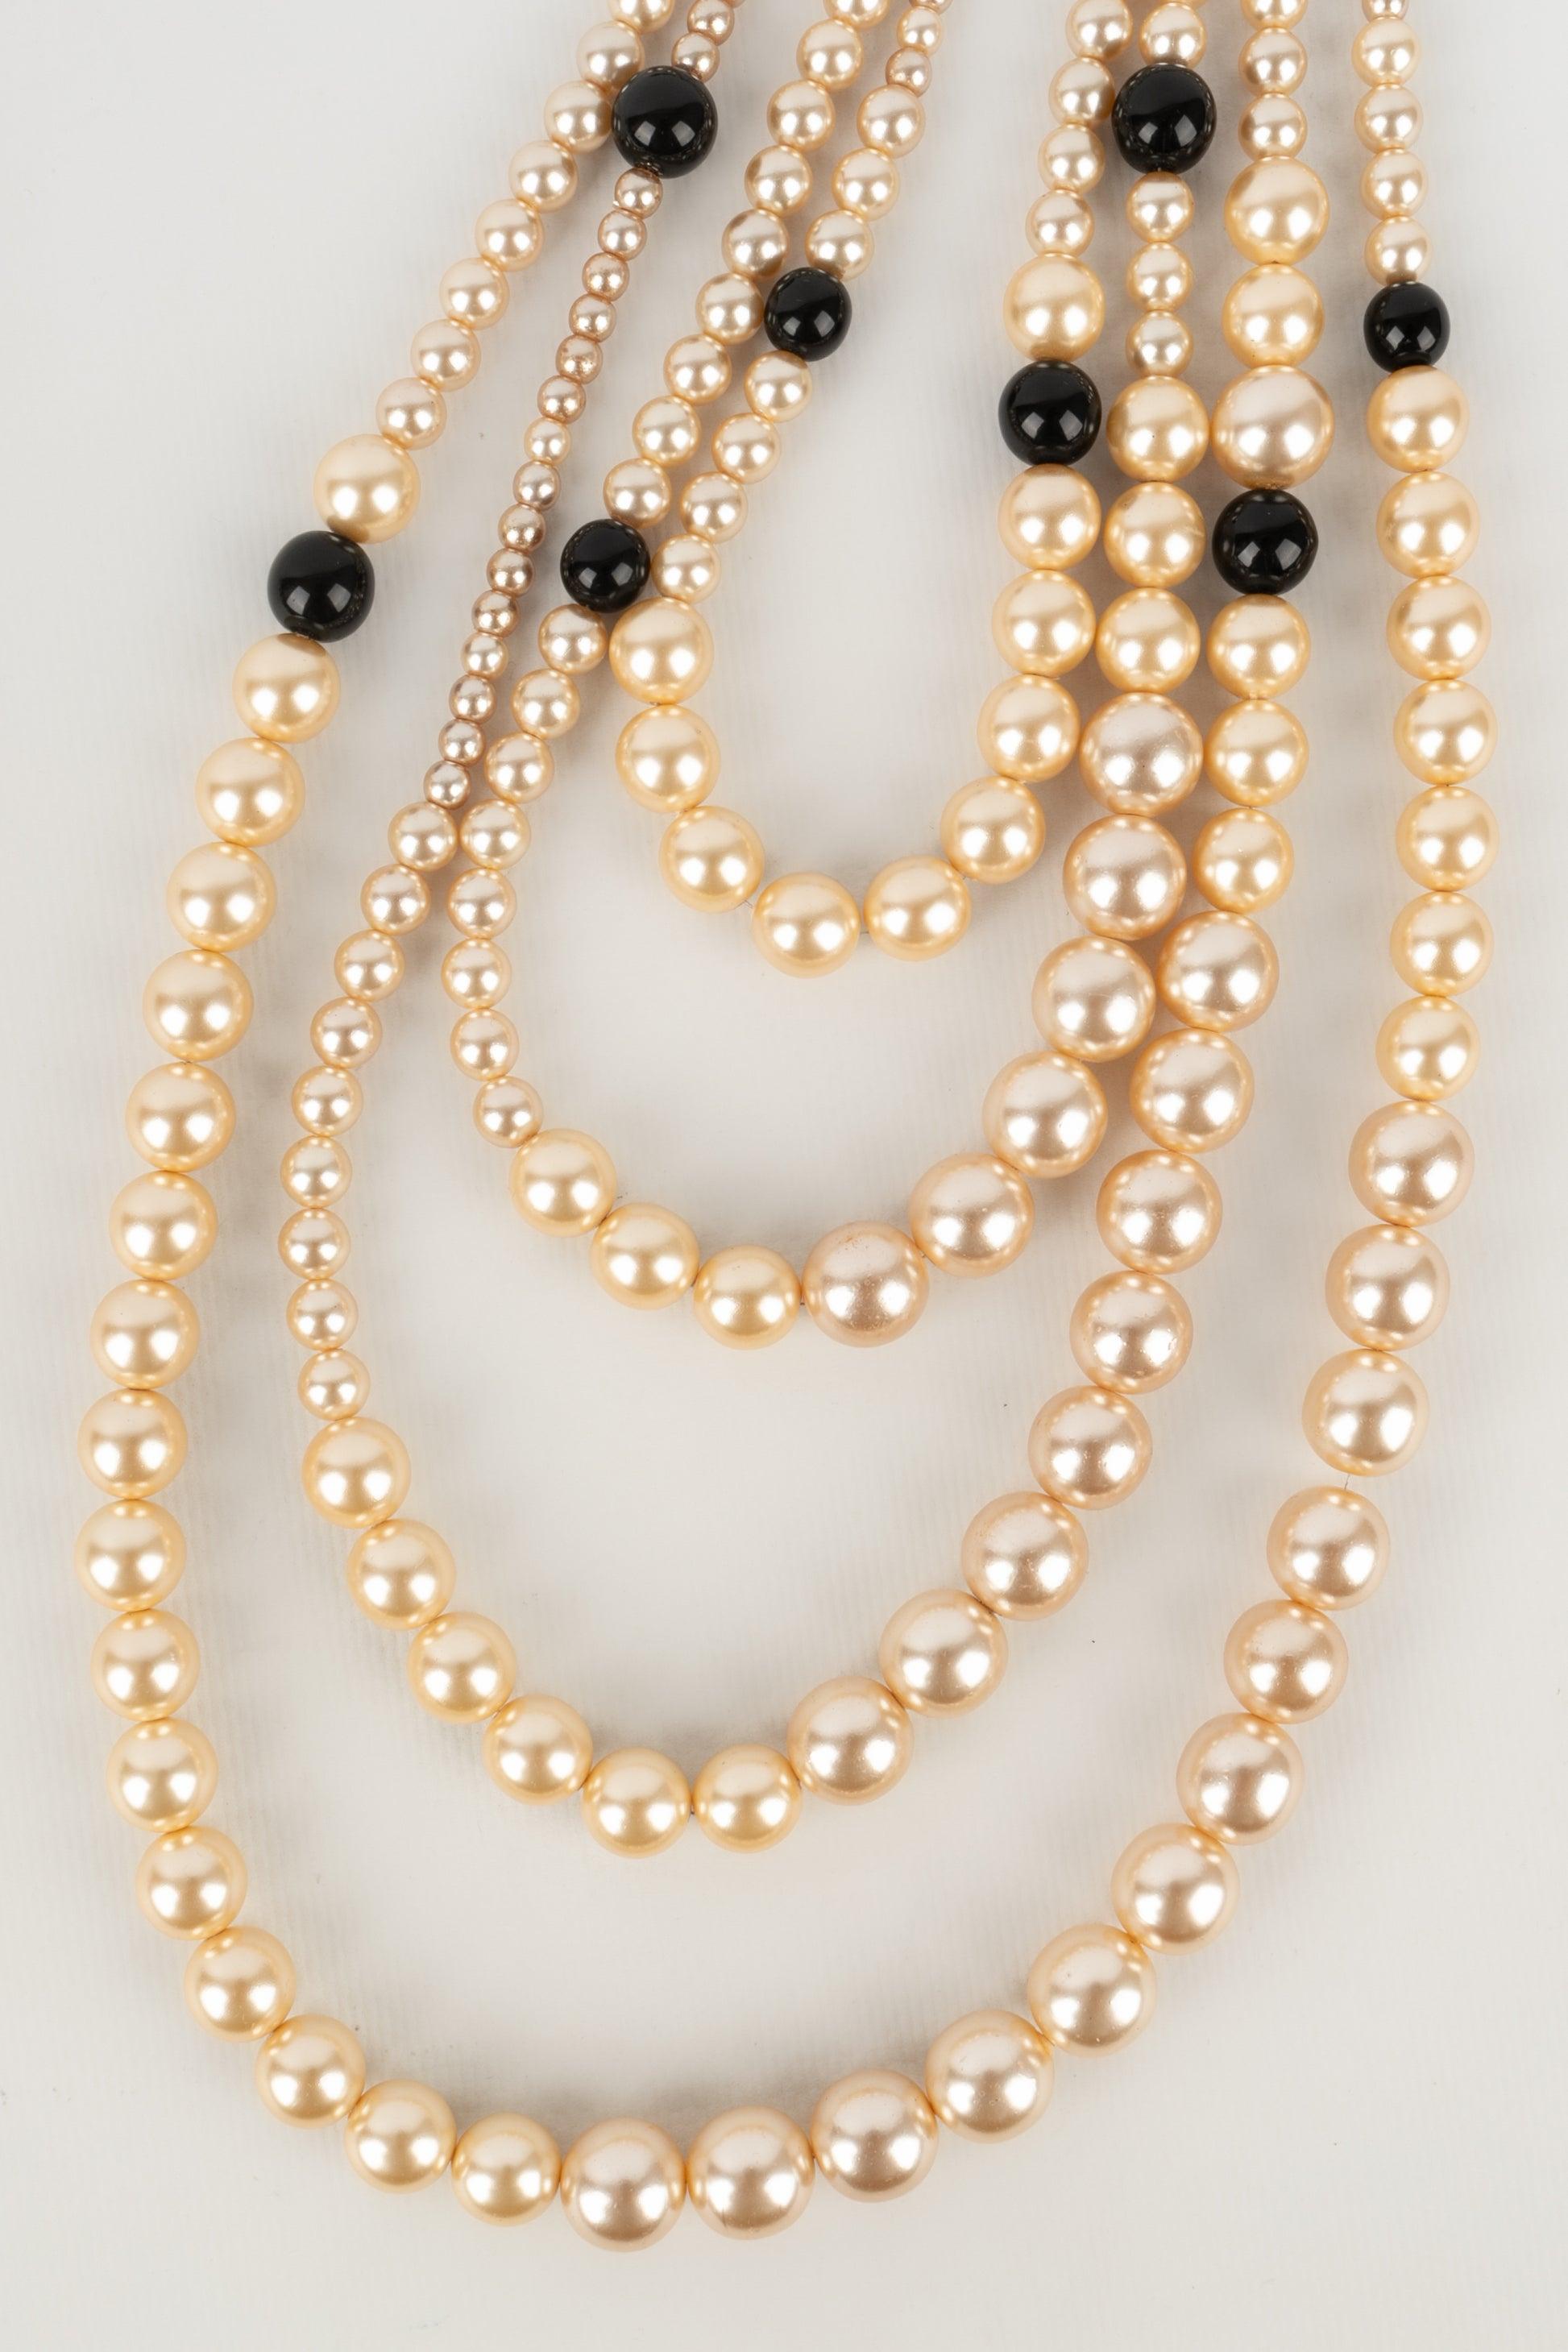 Chanel - Long necklace with costume pearls and black glass pearls. 2003 Spring-Summer Collection.

Additional Information:
Condition: Very good condition
Dimensions: Length of the shorter row: 80 cm
Period: 21st Century

Seller Reference: CB239